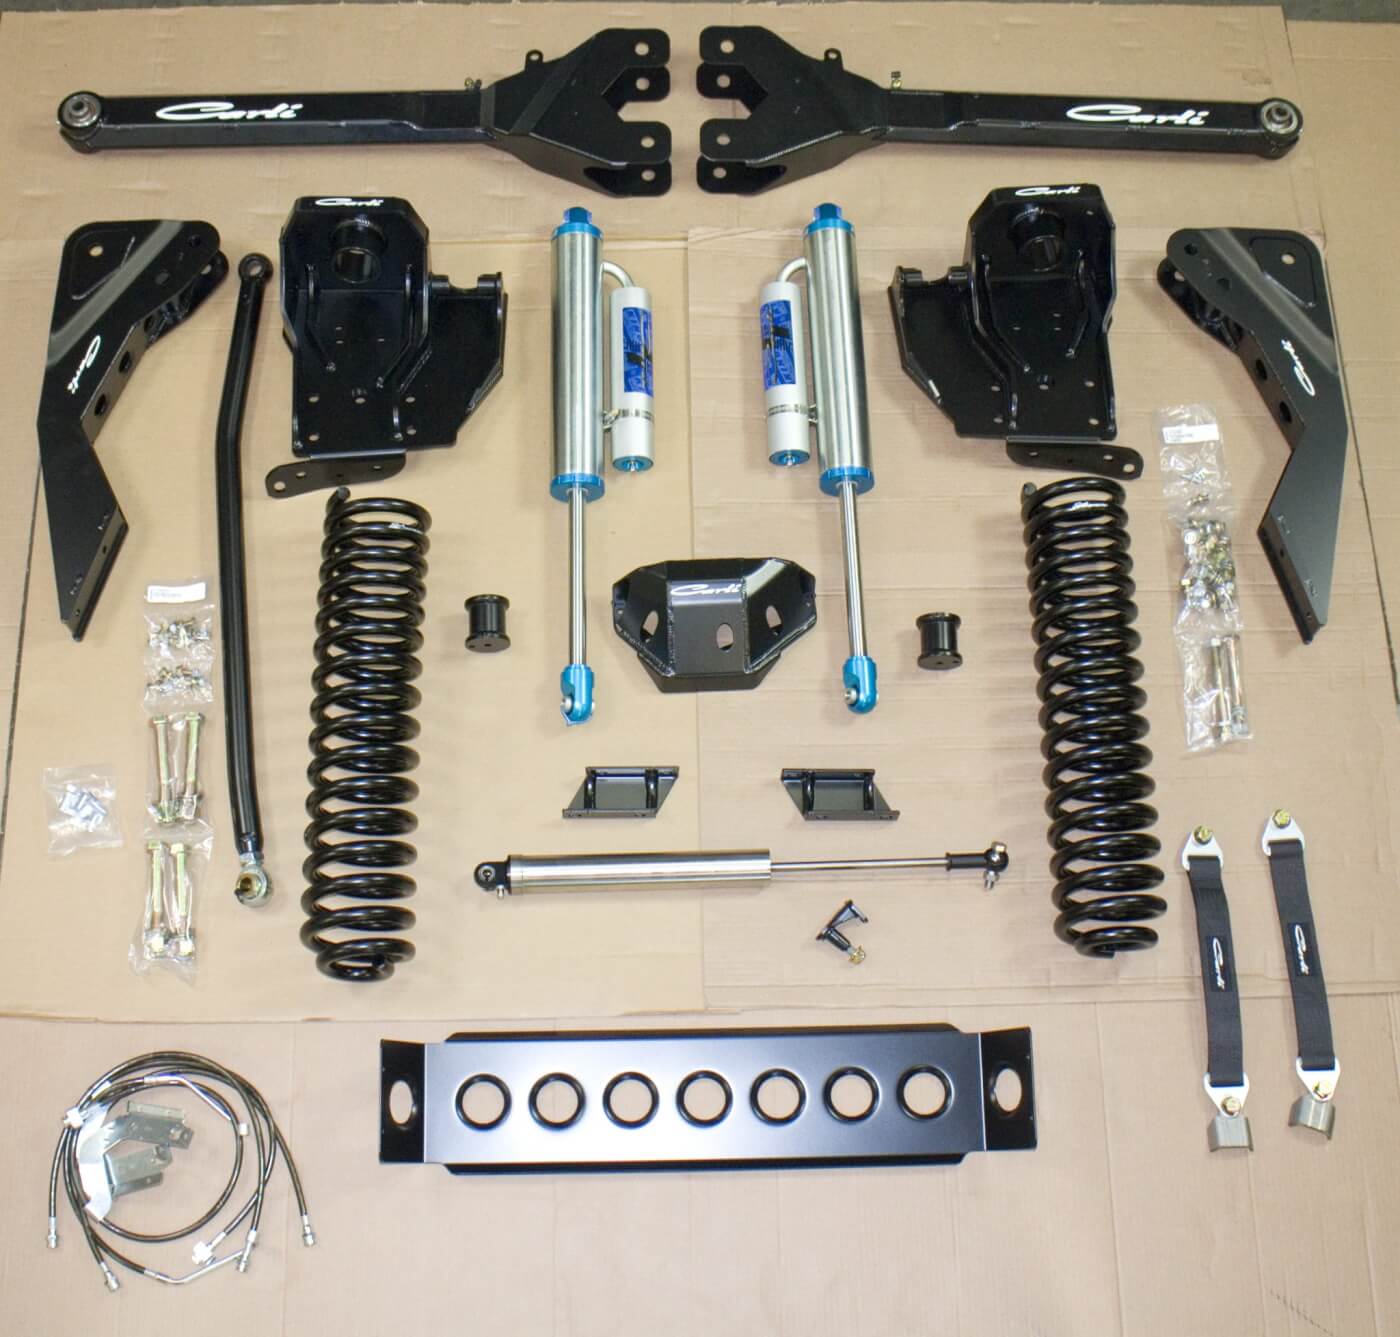 1. Here you see the front components of the Ford F-250 lift in these pages. This is the full Dominator 3.0, 4.5-inch lift setup. The front upgrade included new King remote reservoir shocks, longer springs, new front coils, coil buckets and much more. 